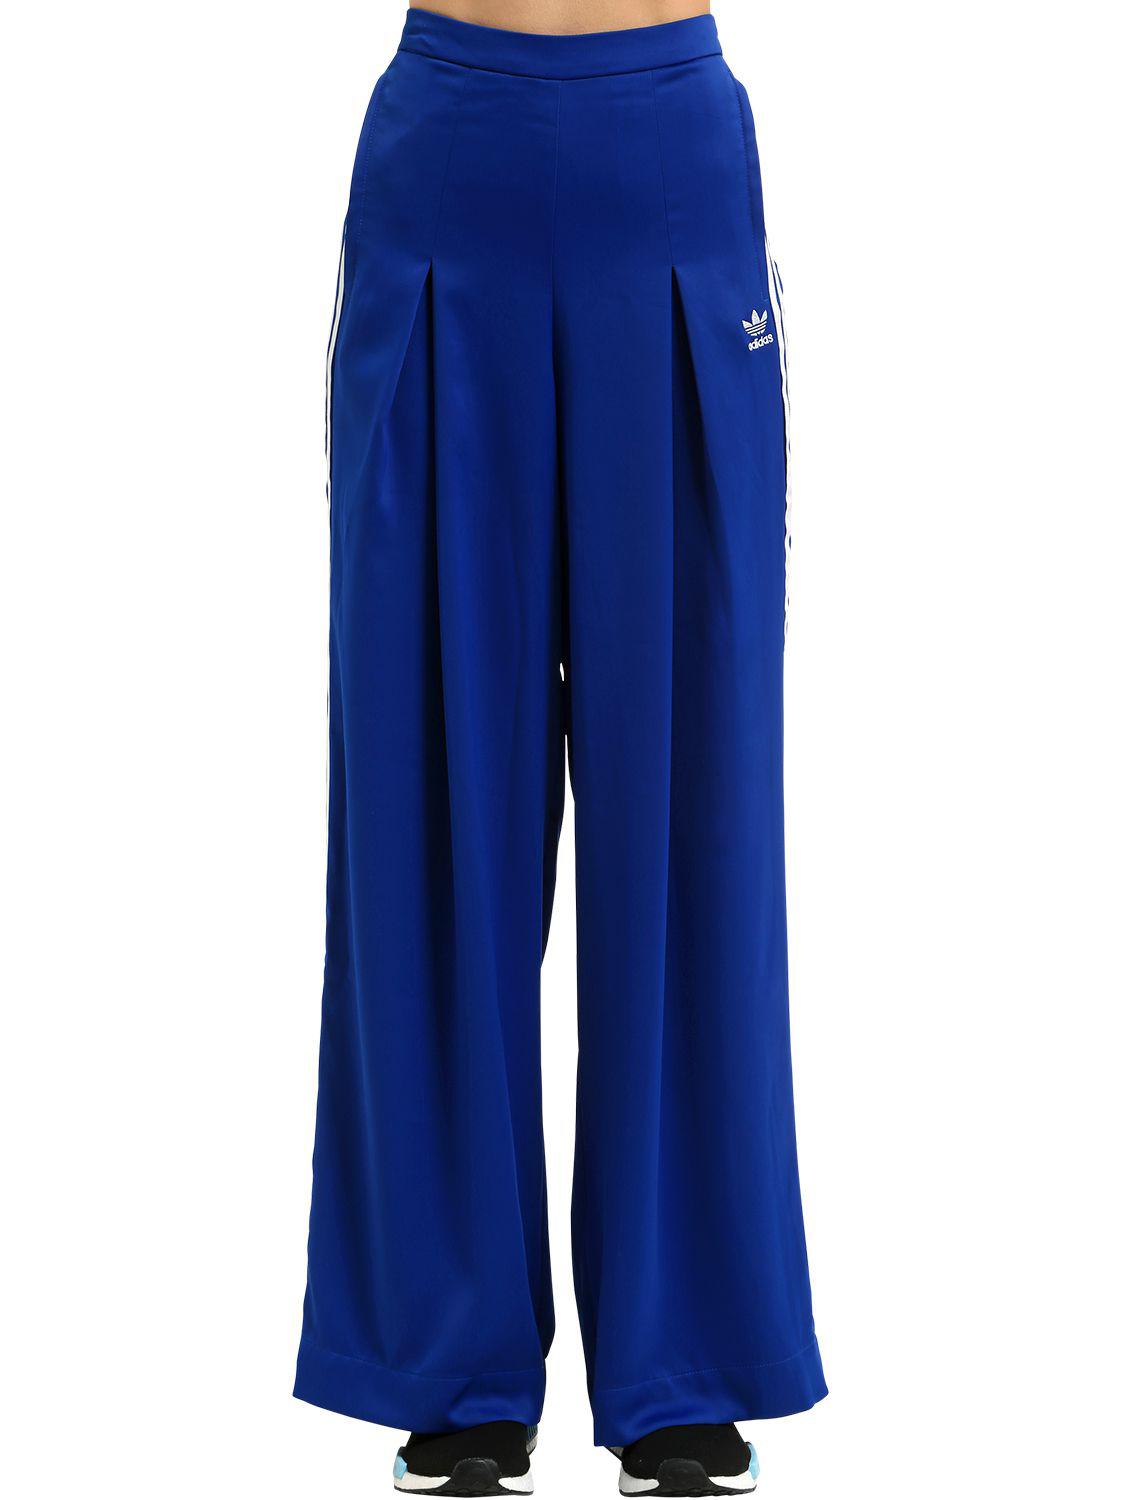 adidas Originals Fashion League Pleated Satin Track Pants in Blue | Lyst